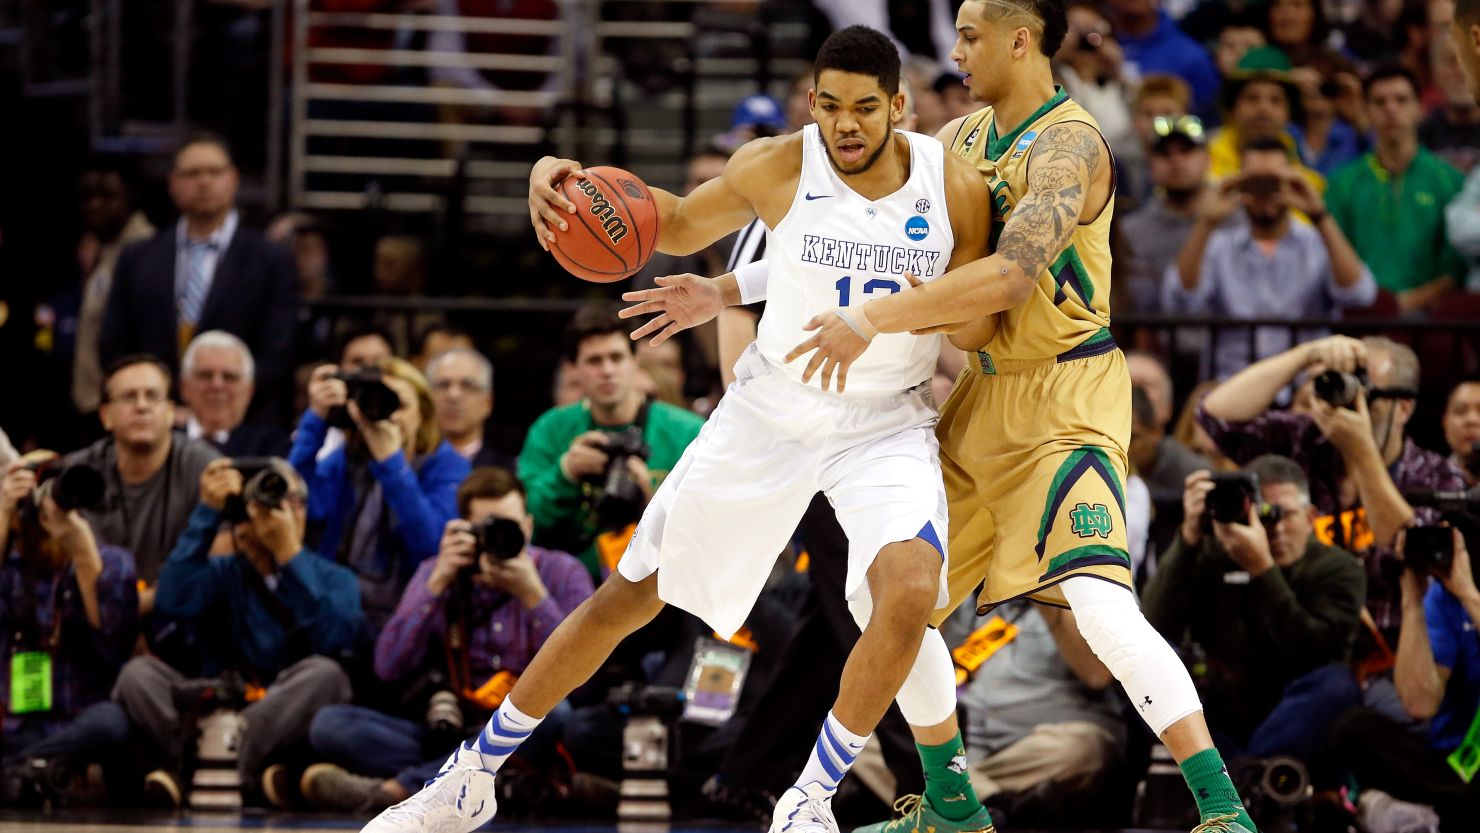 Kentucky's Karl-Anthony Towns dominated Notre Dame in the paint, scoring 25 points